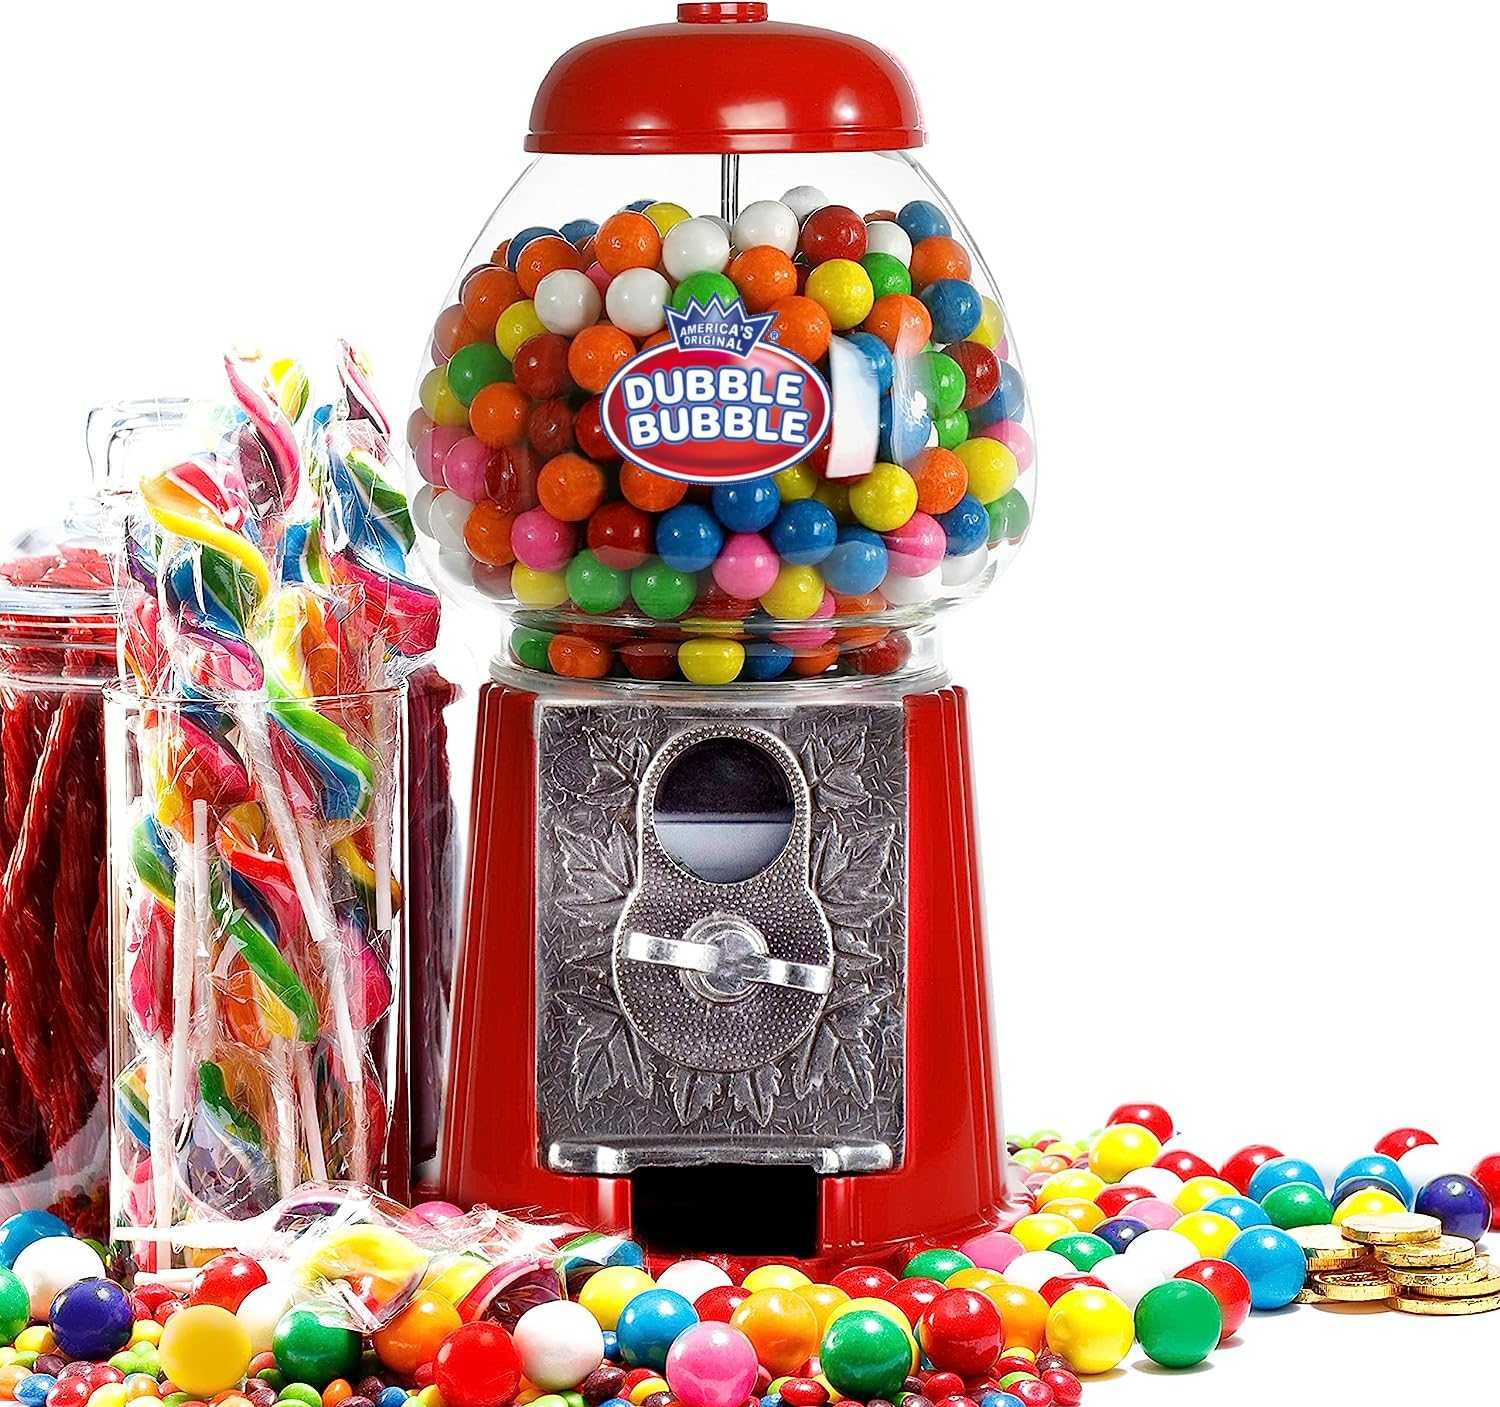 Gumball Machine For Kids 9" - Candy Dispenser Machine - Coin Operated Double Bubble Bubble Gum Machine And Toy Bank - Mini Gumball Machine Holiday Christmas Gift Toys For Girls and Boys